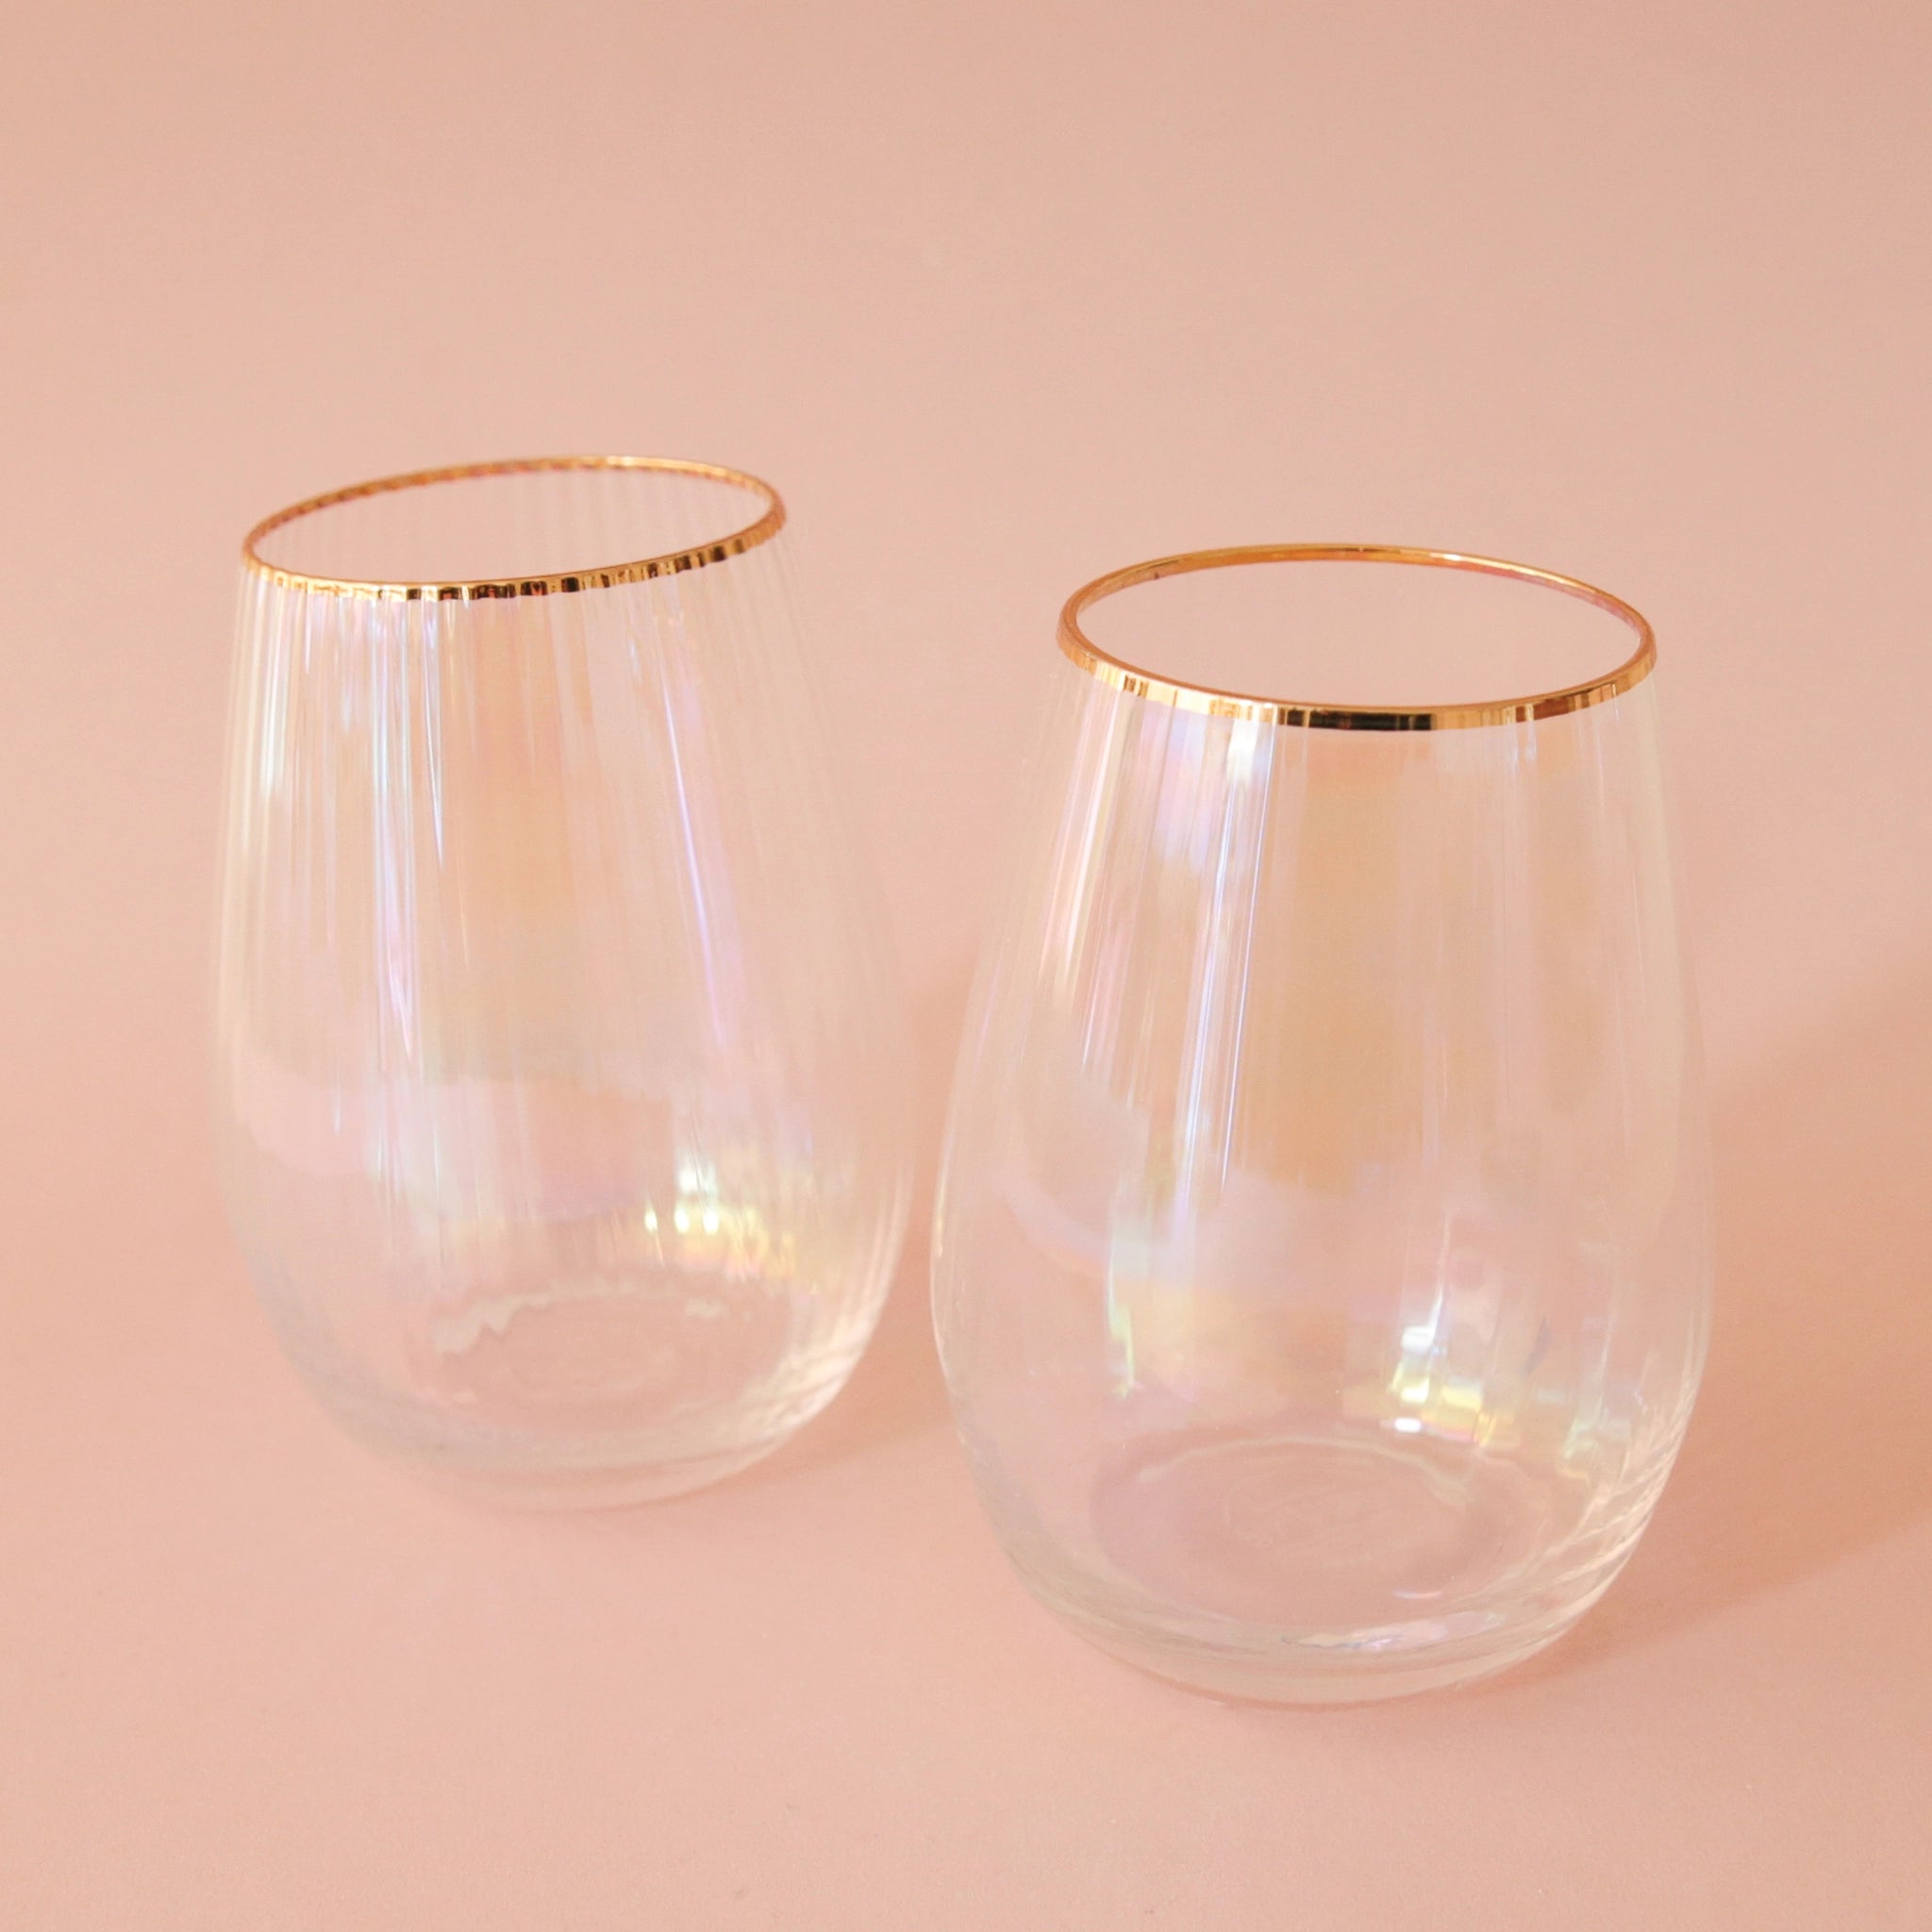 A stemless beveled wine glasses with an iridescent color and a gold rim.